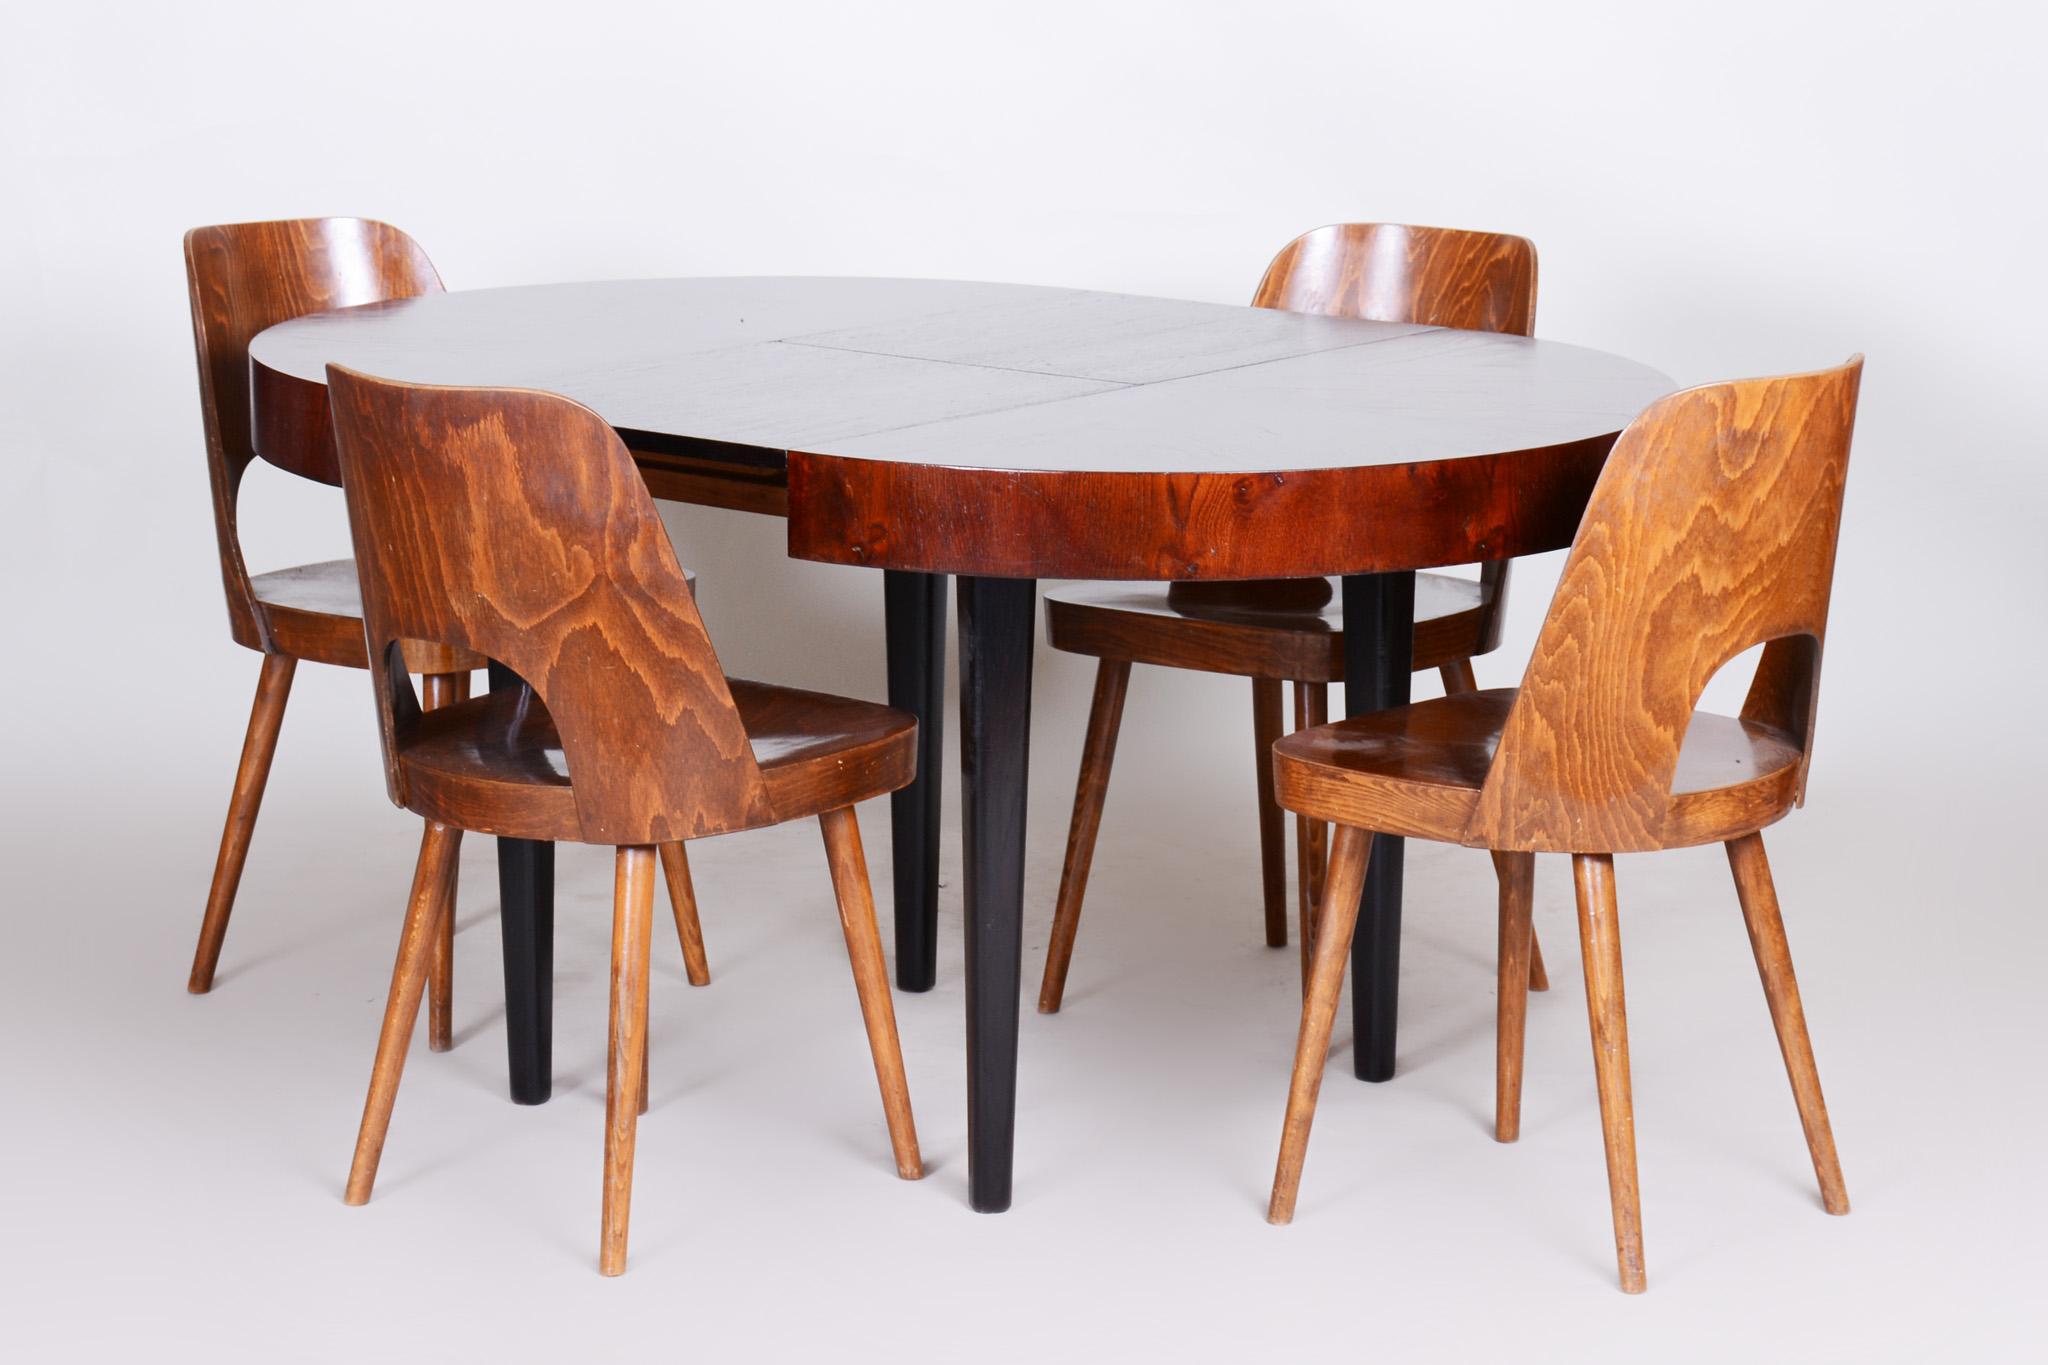 Fully Restored Art Deco Dining Table Made in the 1940s in Czechia, Beech and Oak 9